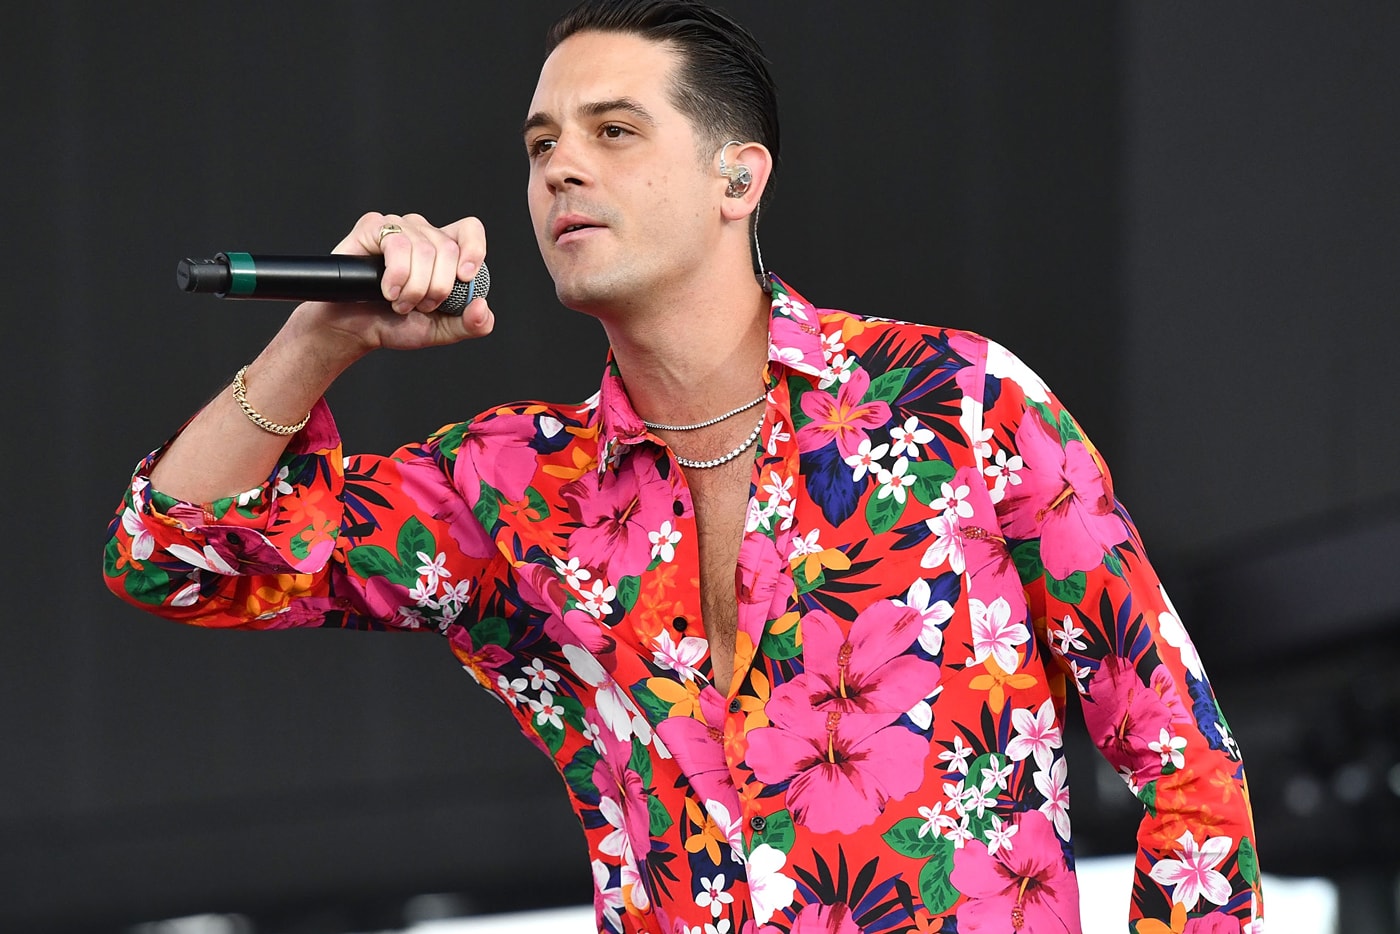 G Eazy The Vault EP Stream may 24 2018 release date info drop debut premiere